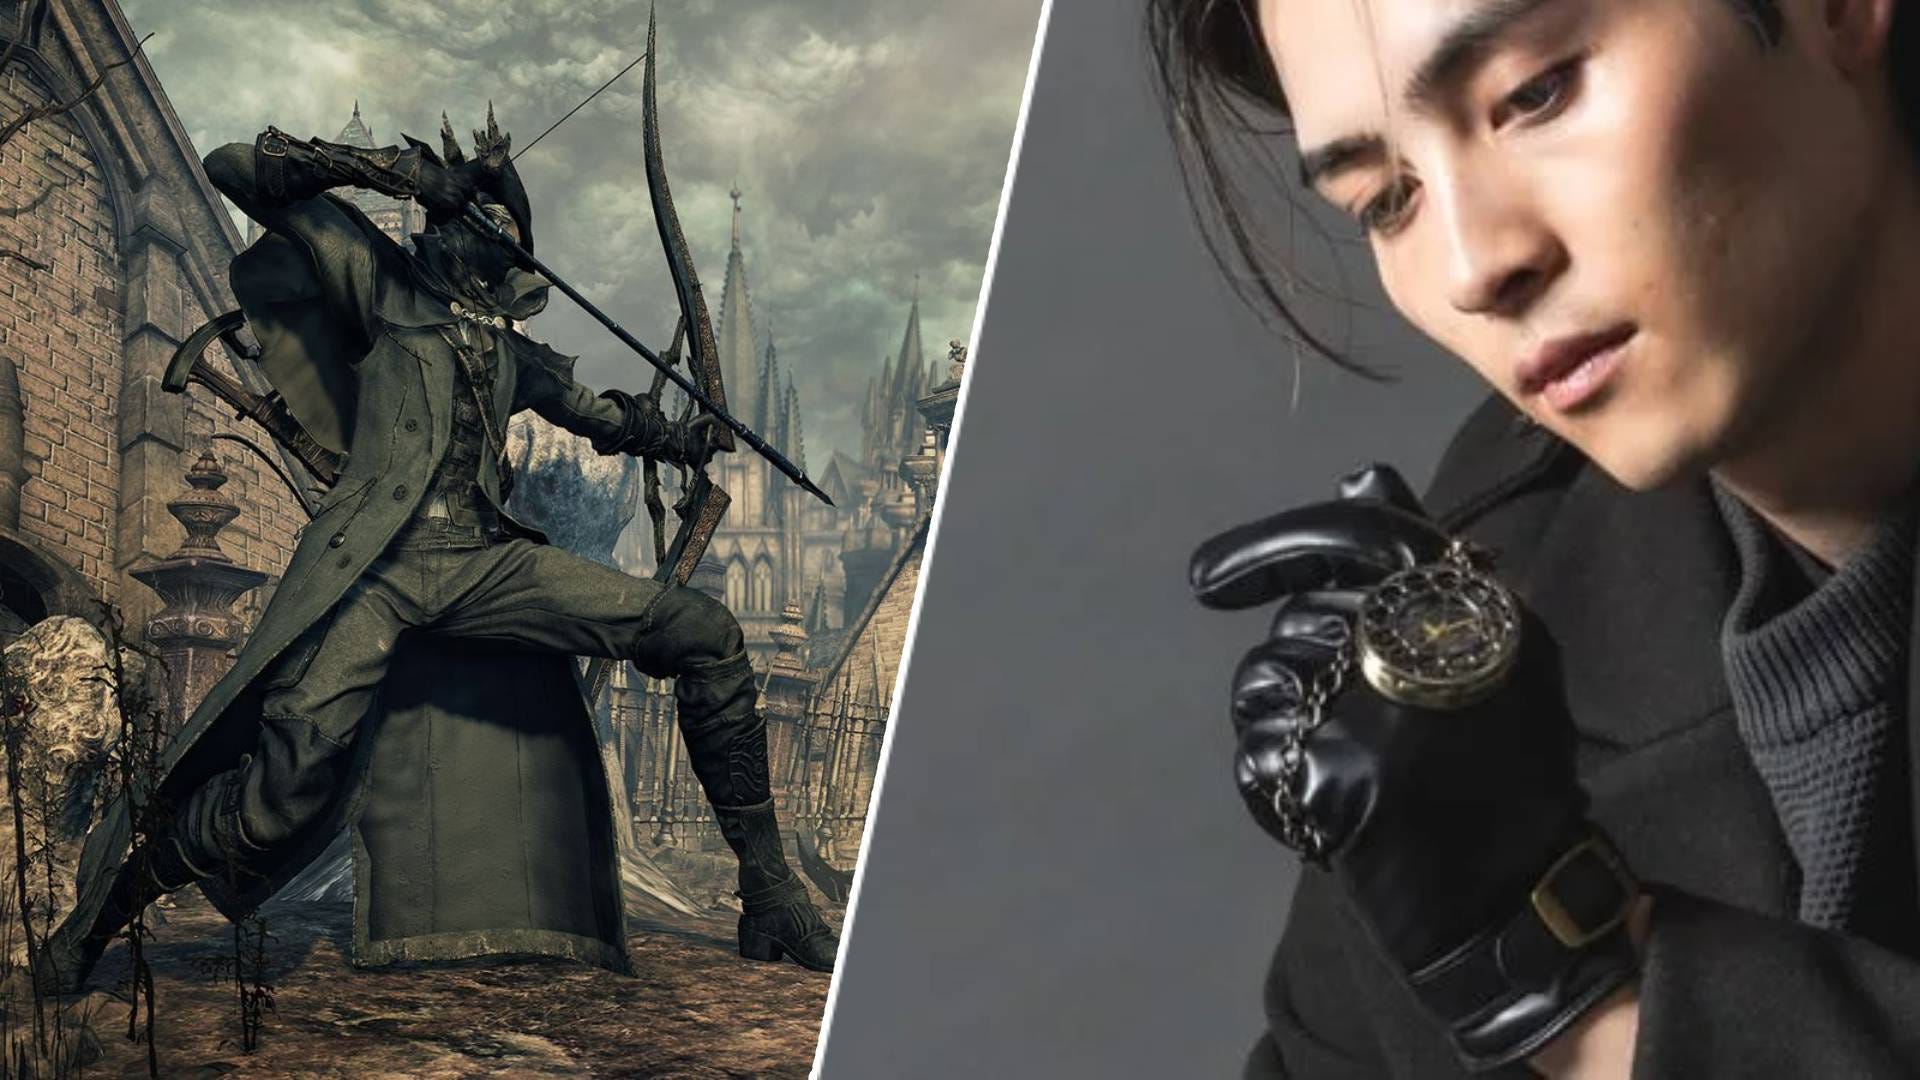 If you still dream about Bloodborne 2, maybe this expensive Bloodborne pocket watch will sate your hunger – it won’t